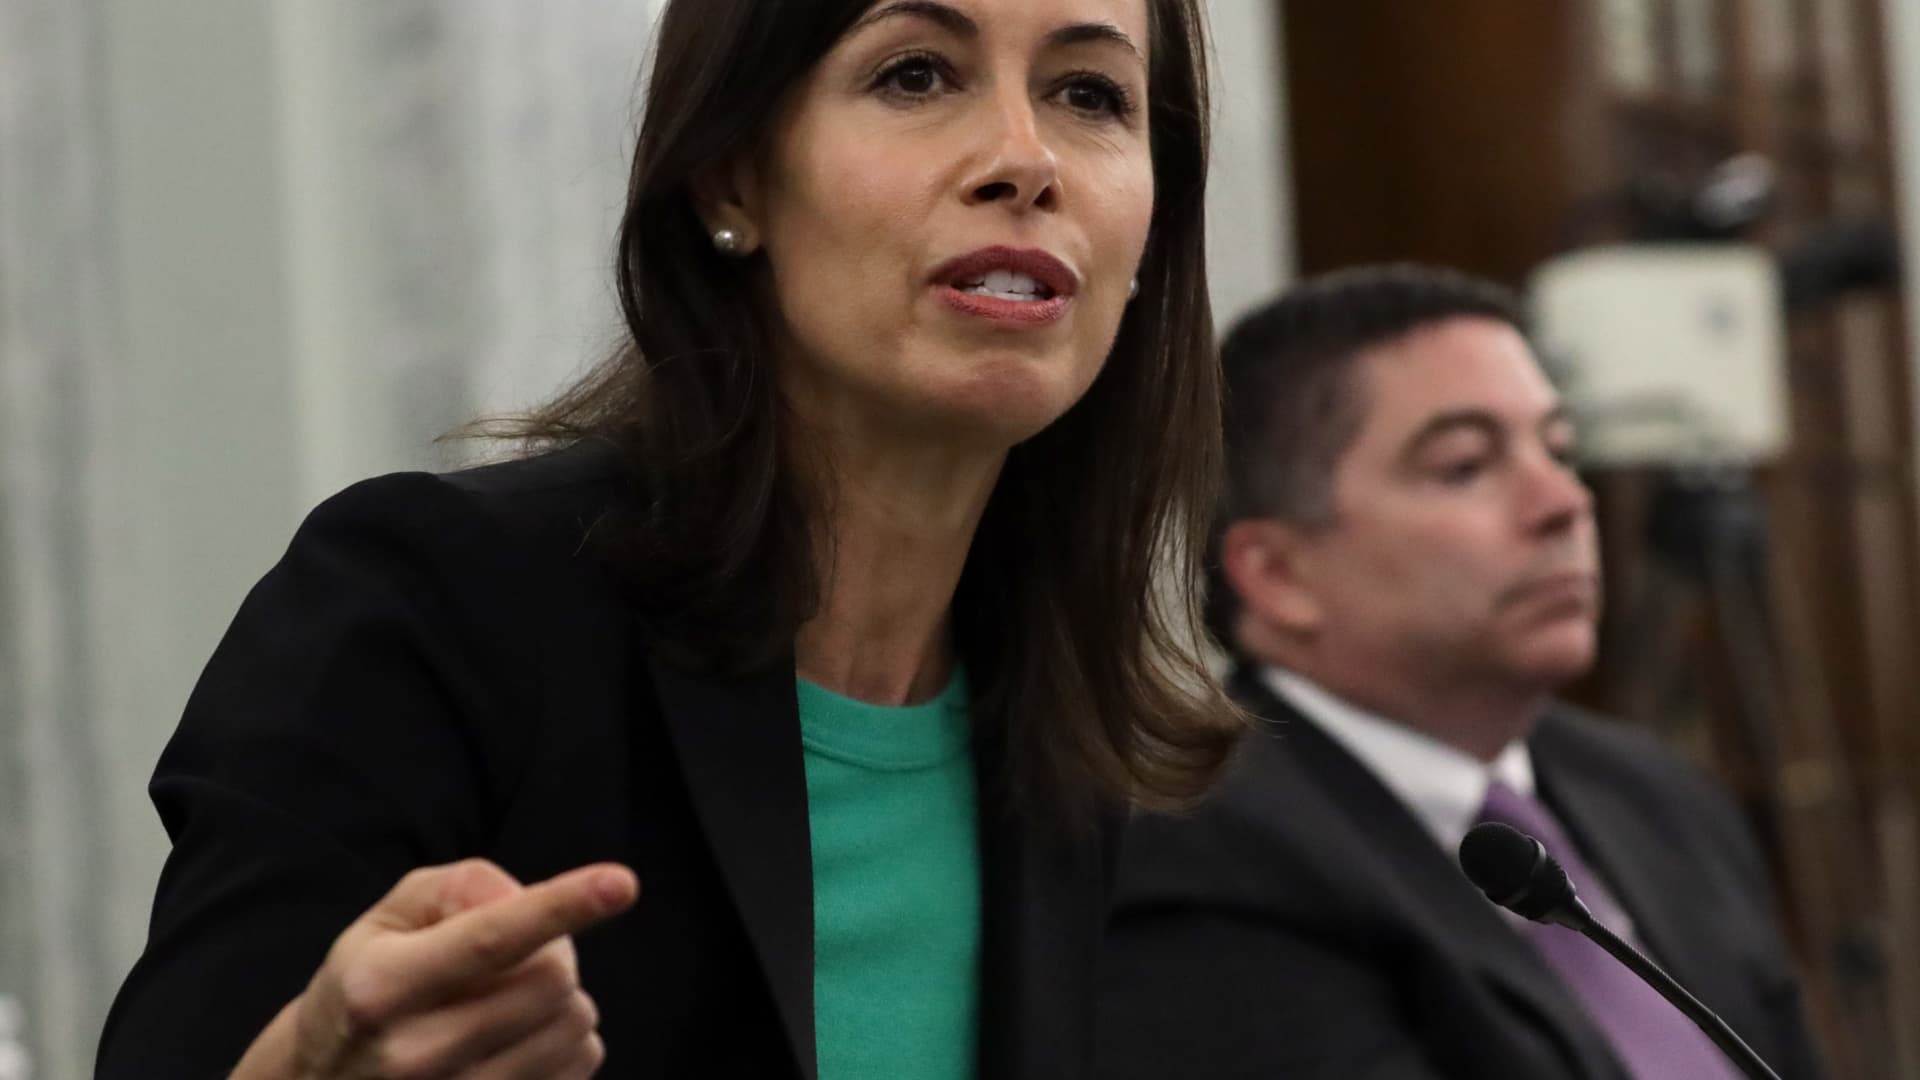 Commissioner of Federal Communications Commission Jessica Rosenworcel (L) speaks as commissioner of Federal Communications Commission Michael O'Rielly (R) listens during an oversight hearing to examine the Federal Communications Commission on June 24, 2020 in Washington, DC.